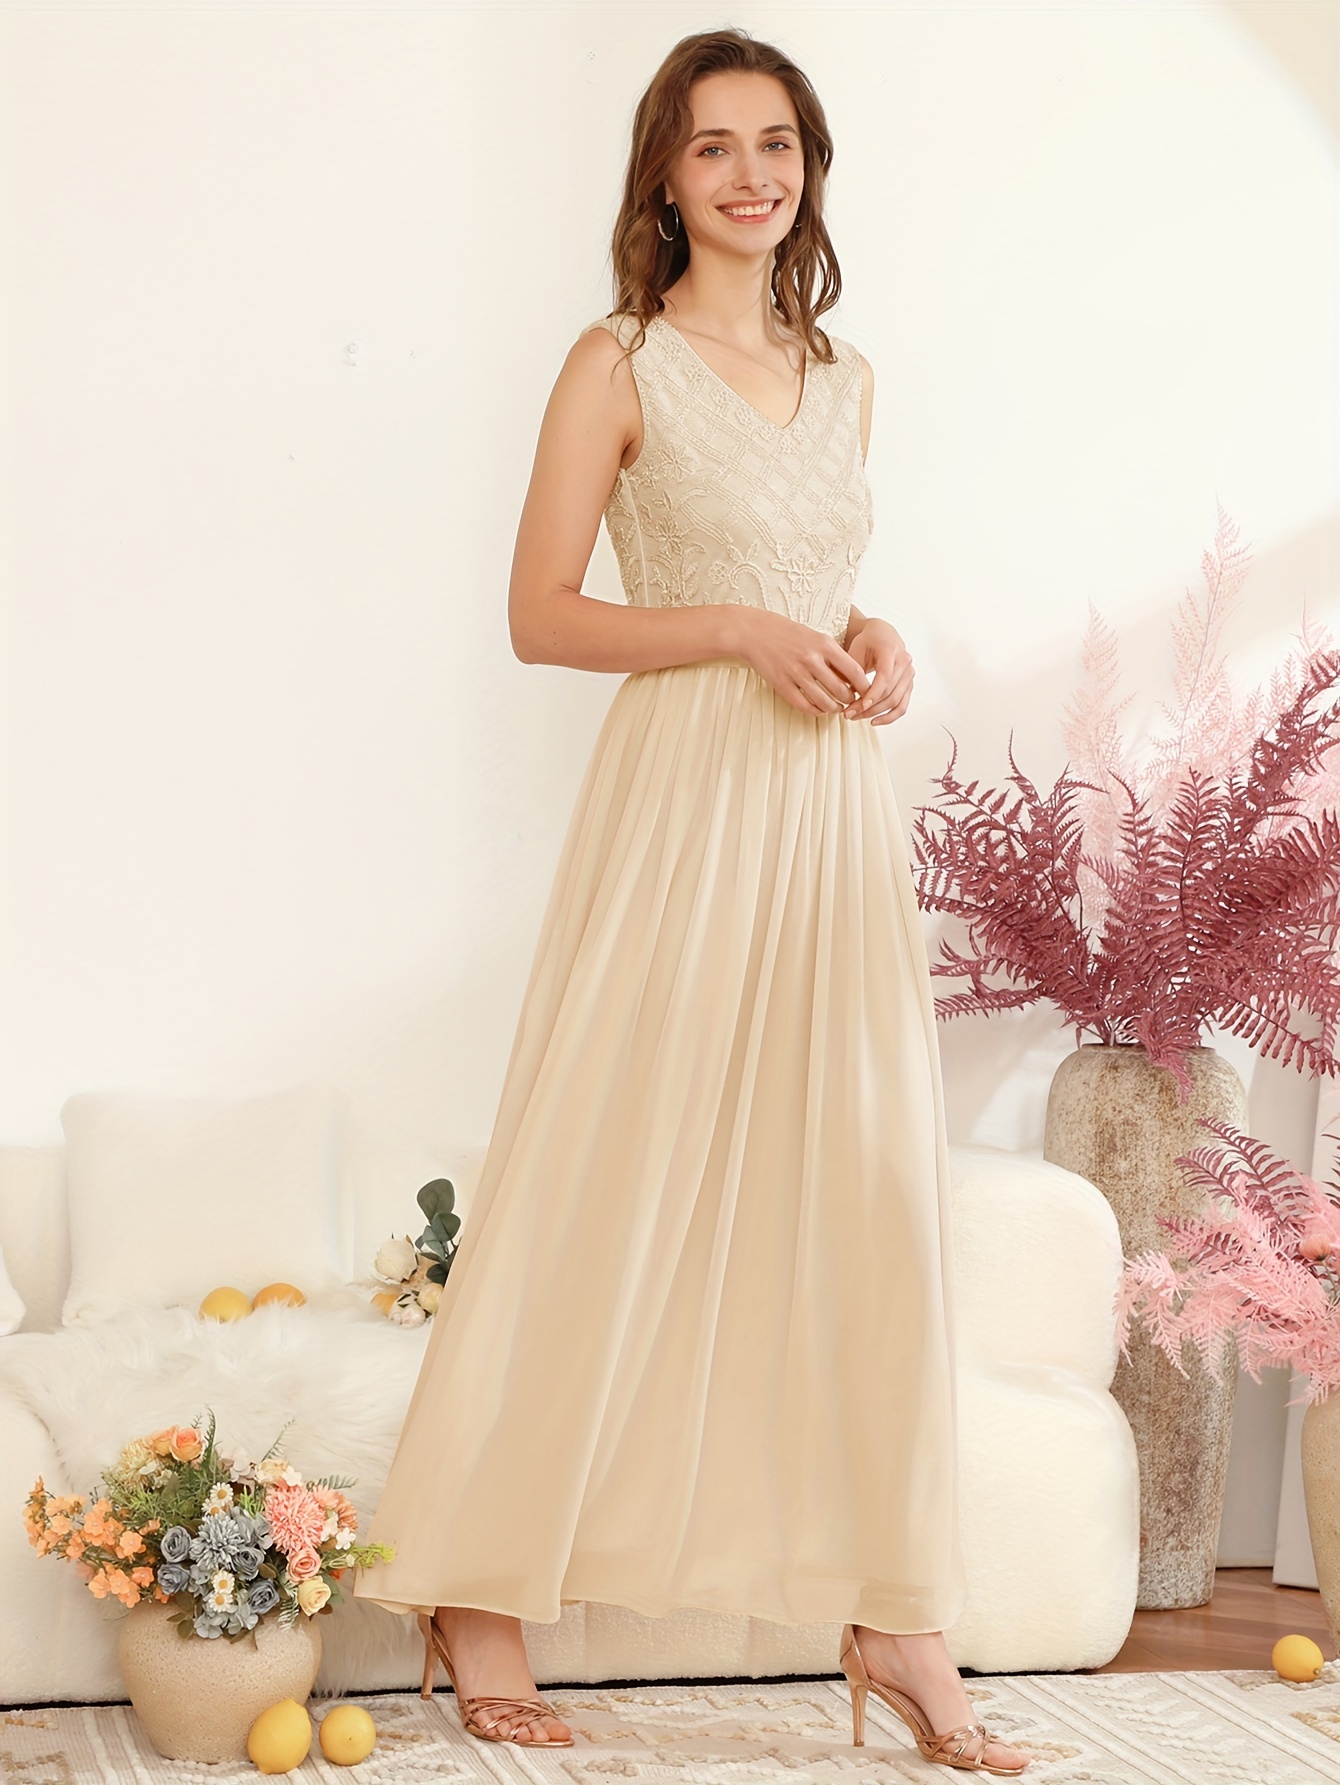 solid v neck bridesmaid dress elegant sleeve tulle dress for party banquet womens clothing